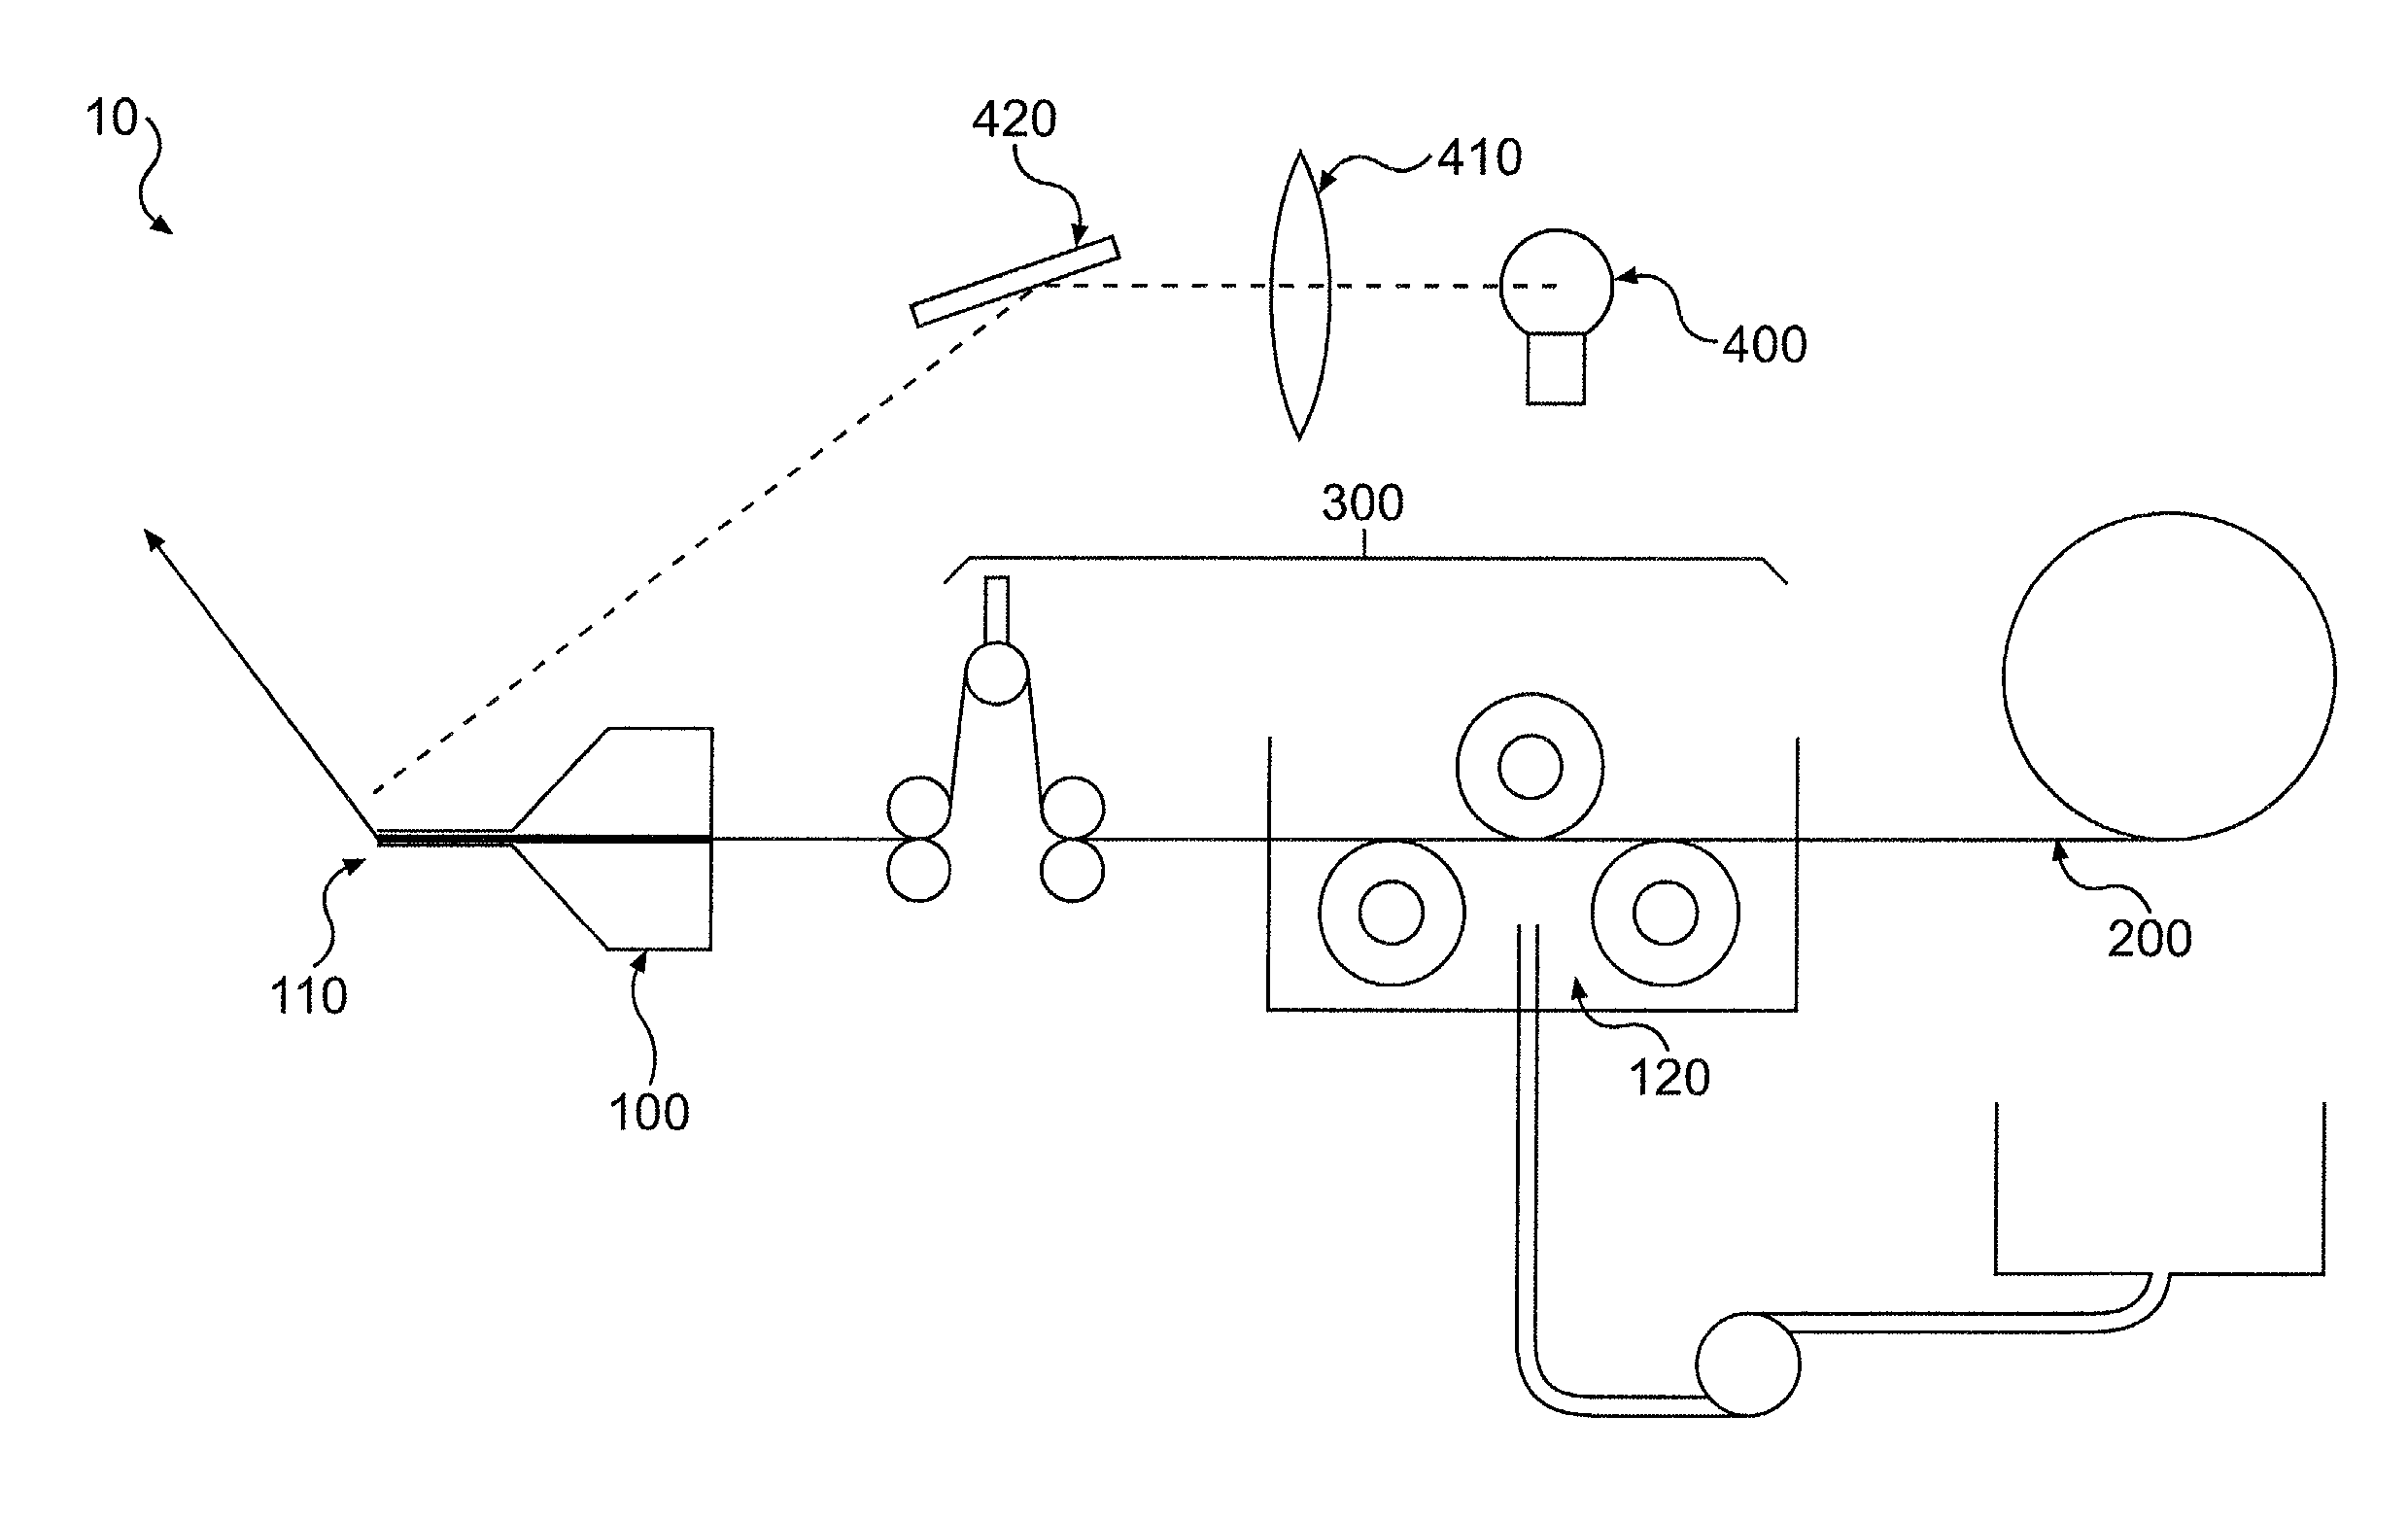 Apparatus and method of fabricating fiber reinforced plastic parts